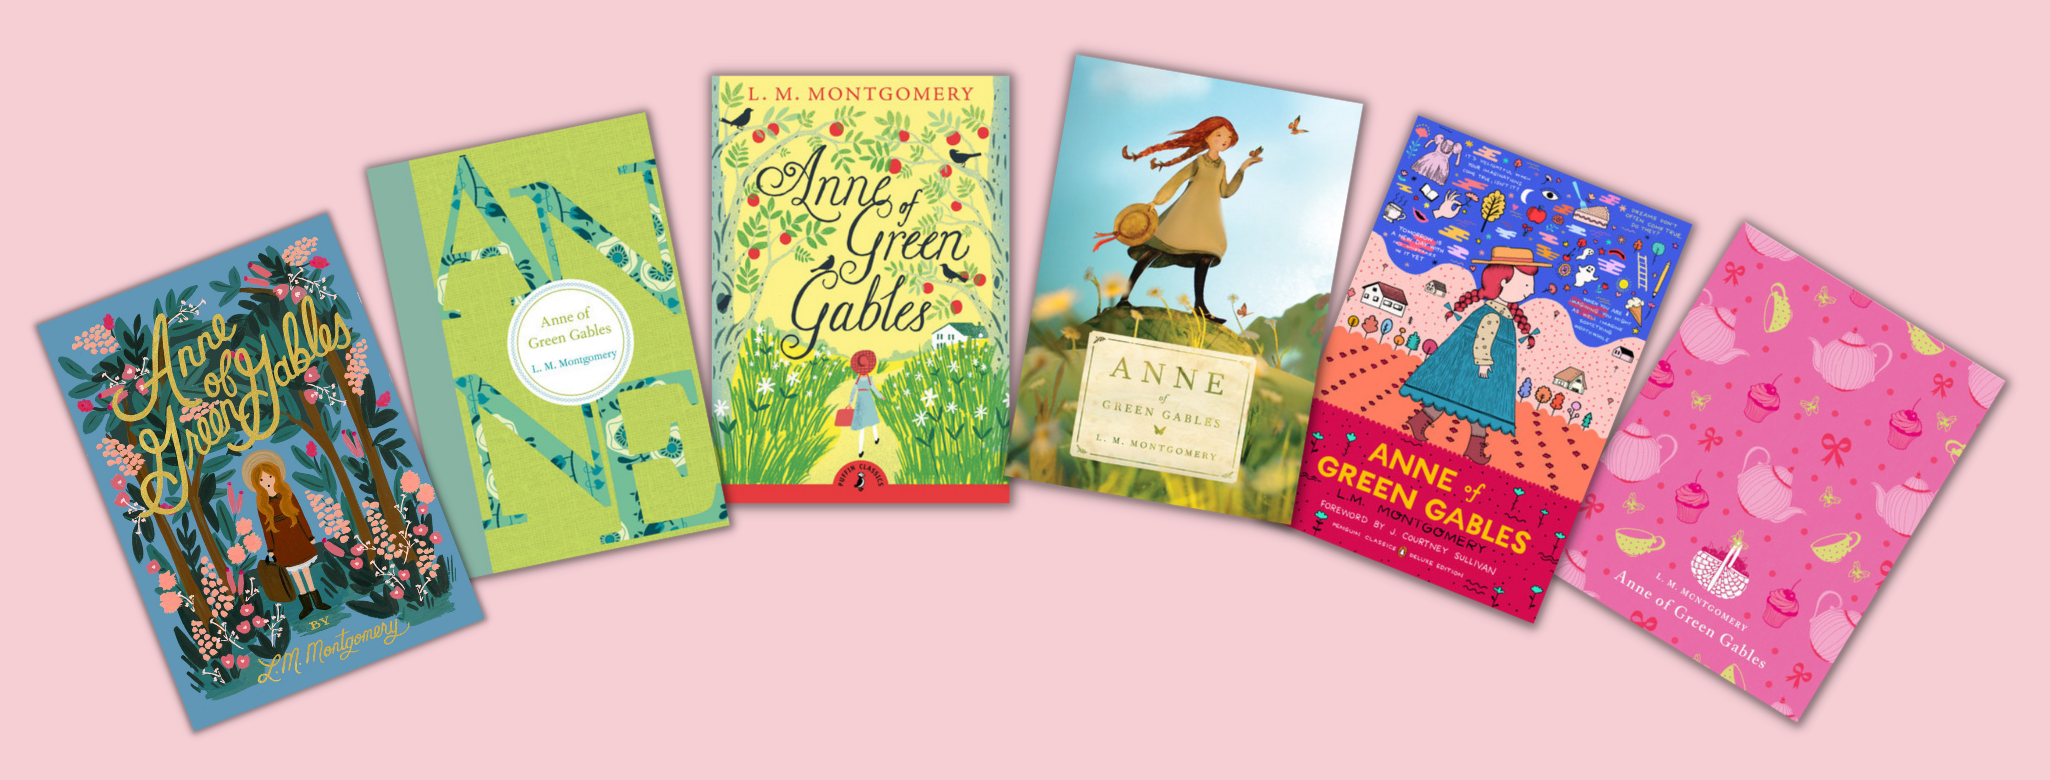 Back to School with Anne of Green Gables